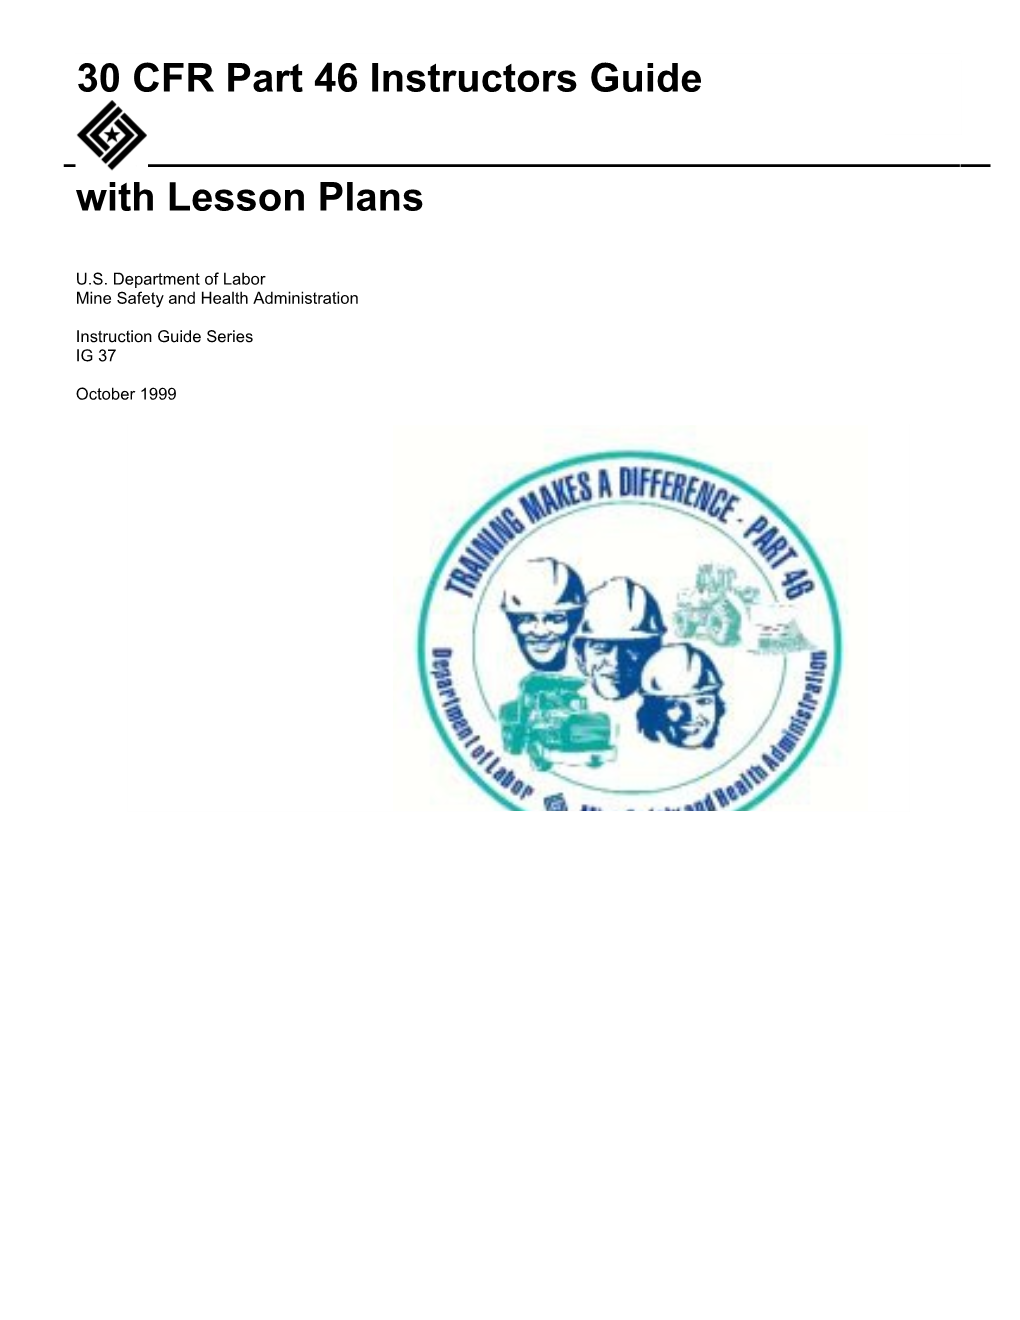 With Lesson Plans